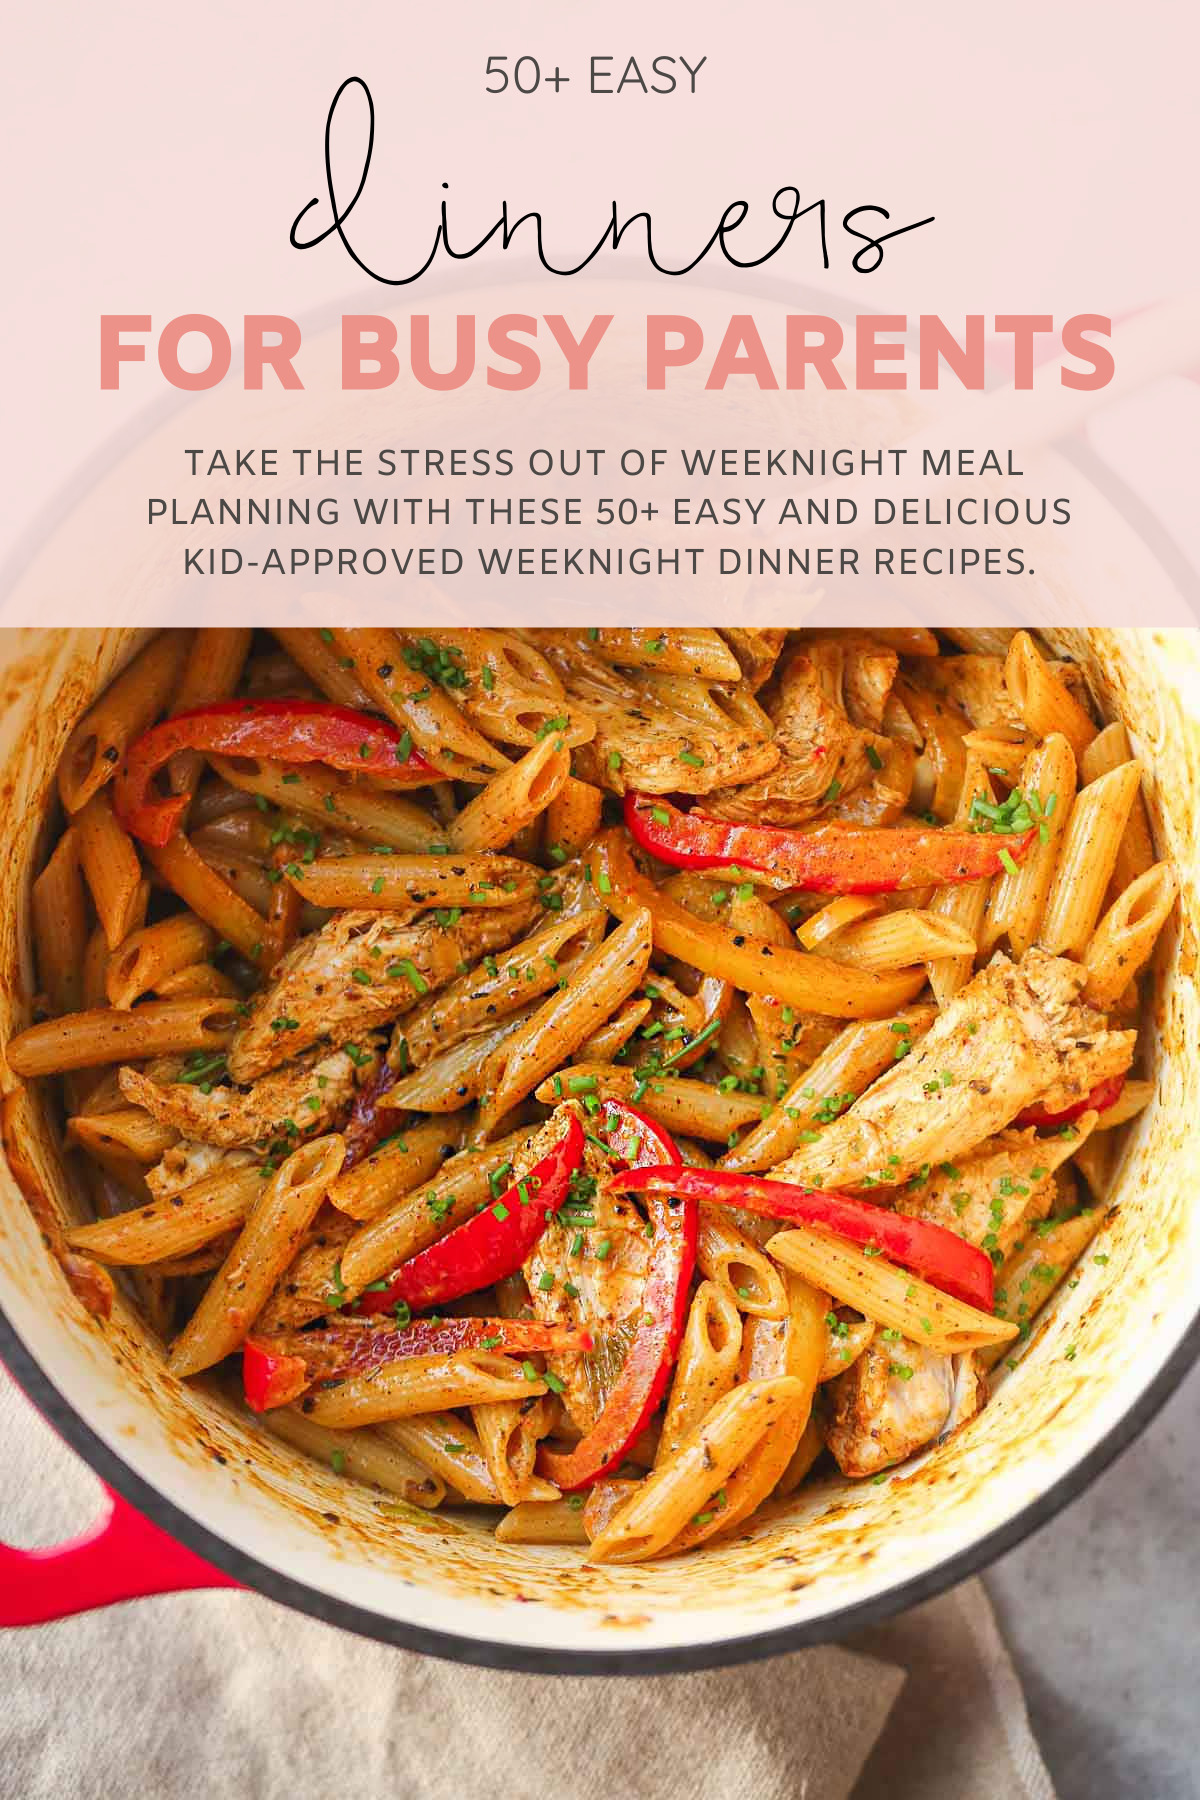 Take the stress out of weeknight meal planning with these 50+ easy and delicious weeknight dinner recipes for busy parents. We're talking sheet pan meals, dinners that can be made in a crock pot or Instant Pot, one pan dinners, skillet meals, and more; and all are family and kid-approved. | @glitterinclexi | GLITTERINC.COM